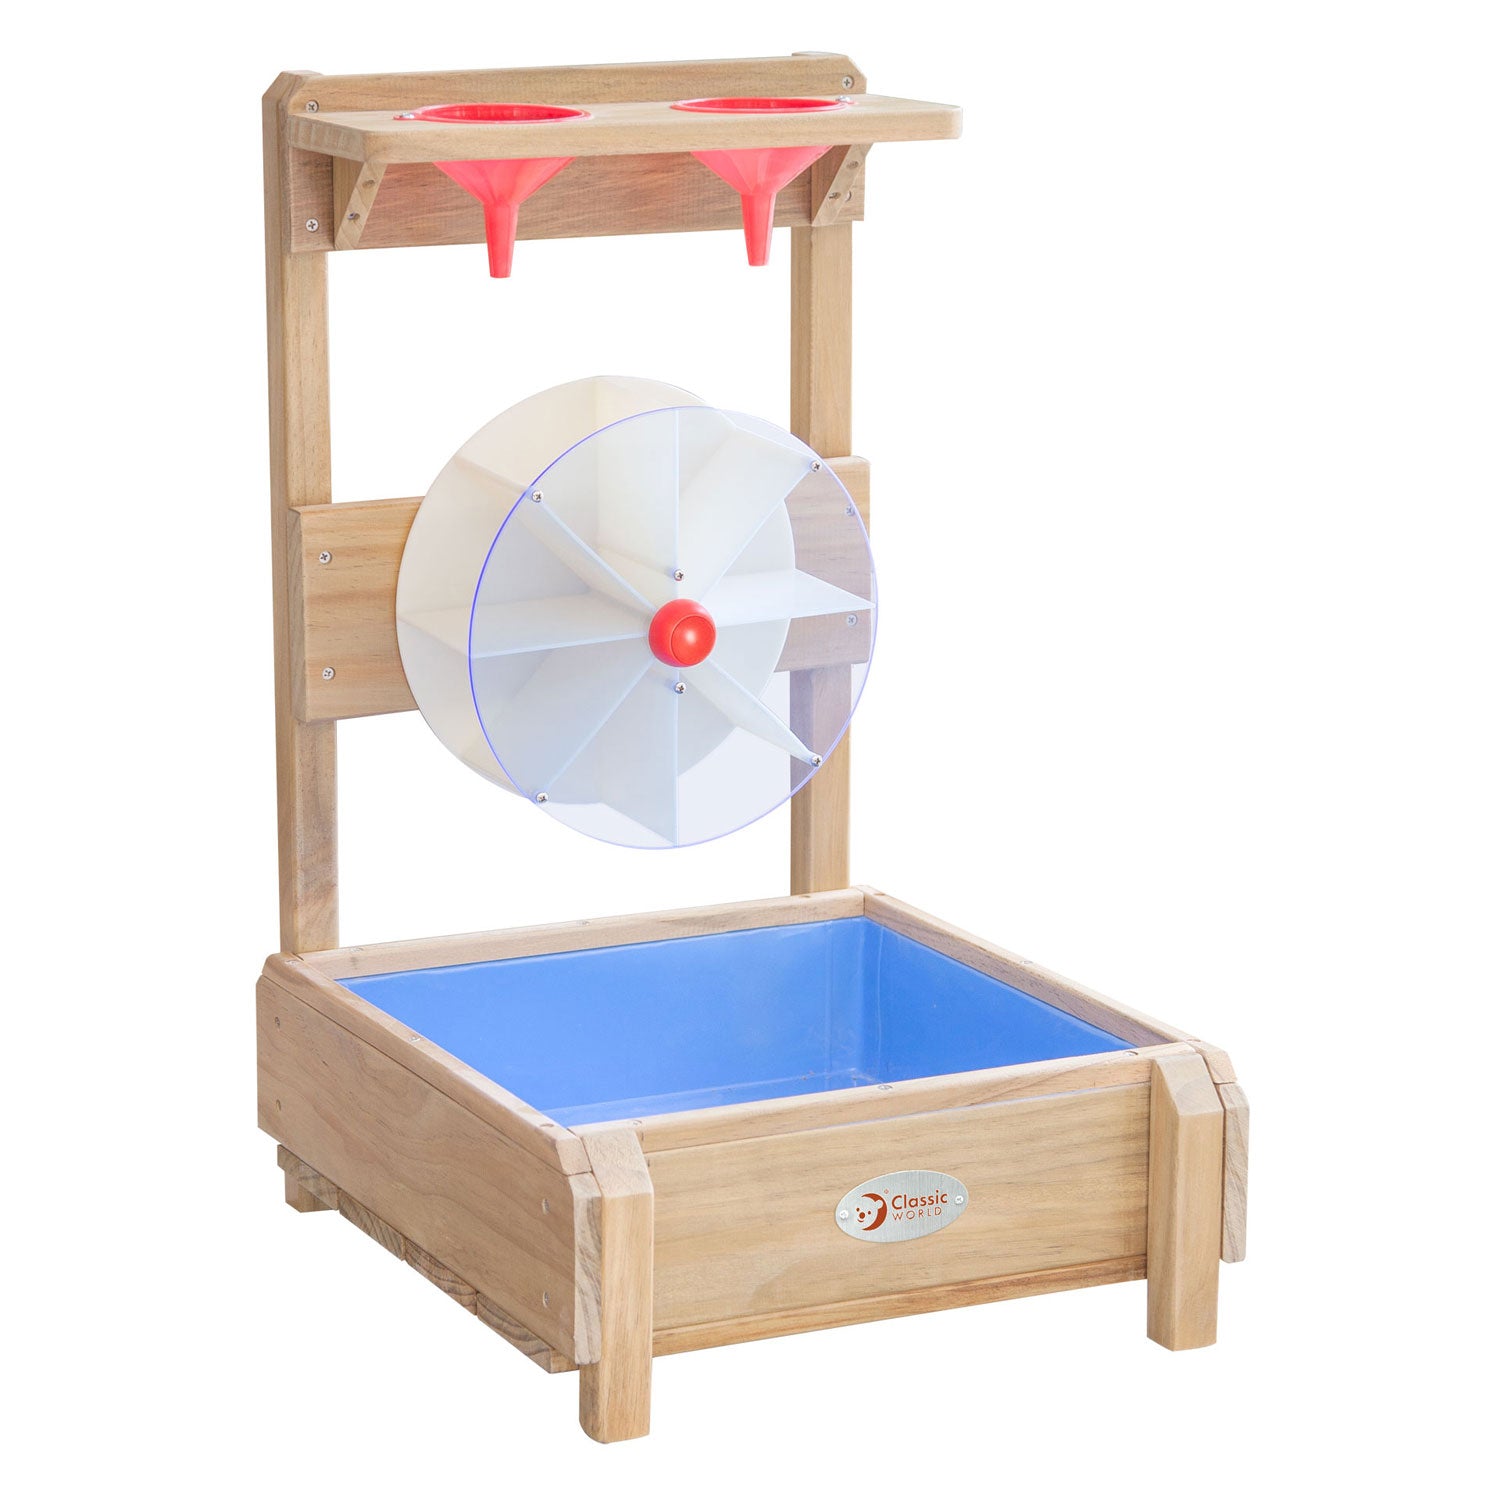 classicworld Classic World Wooden Water Table with Funnels and